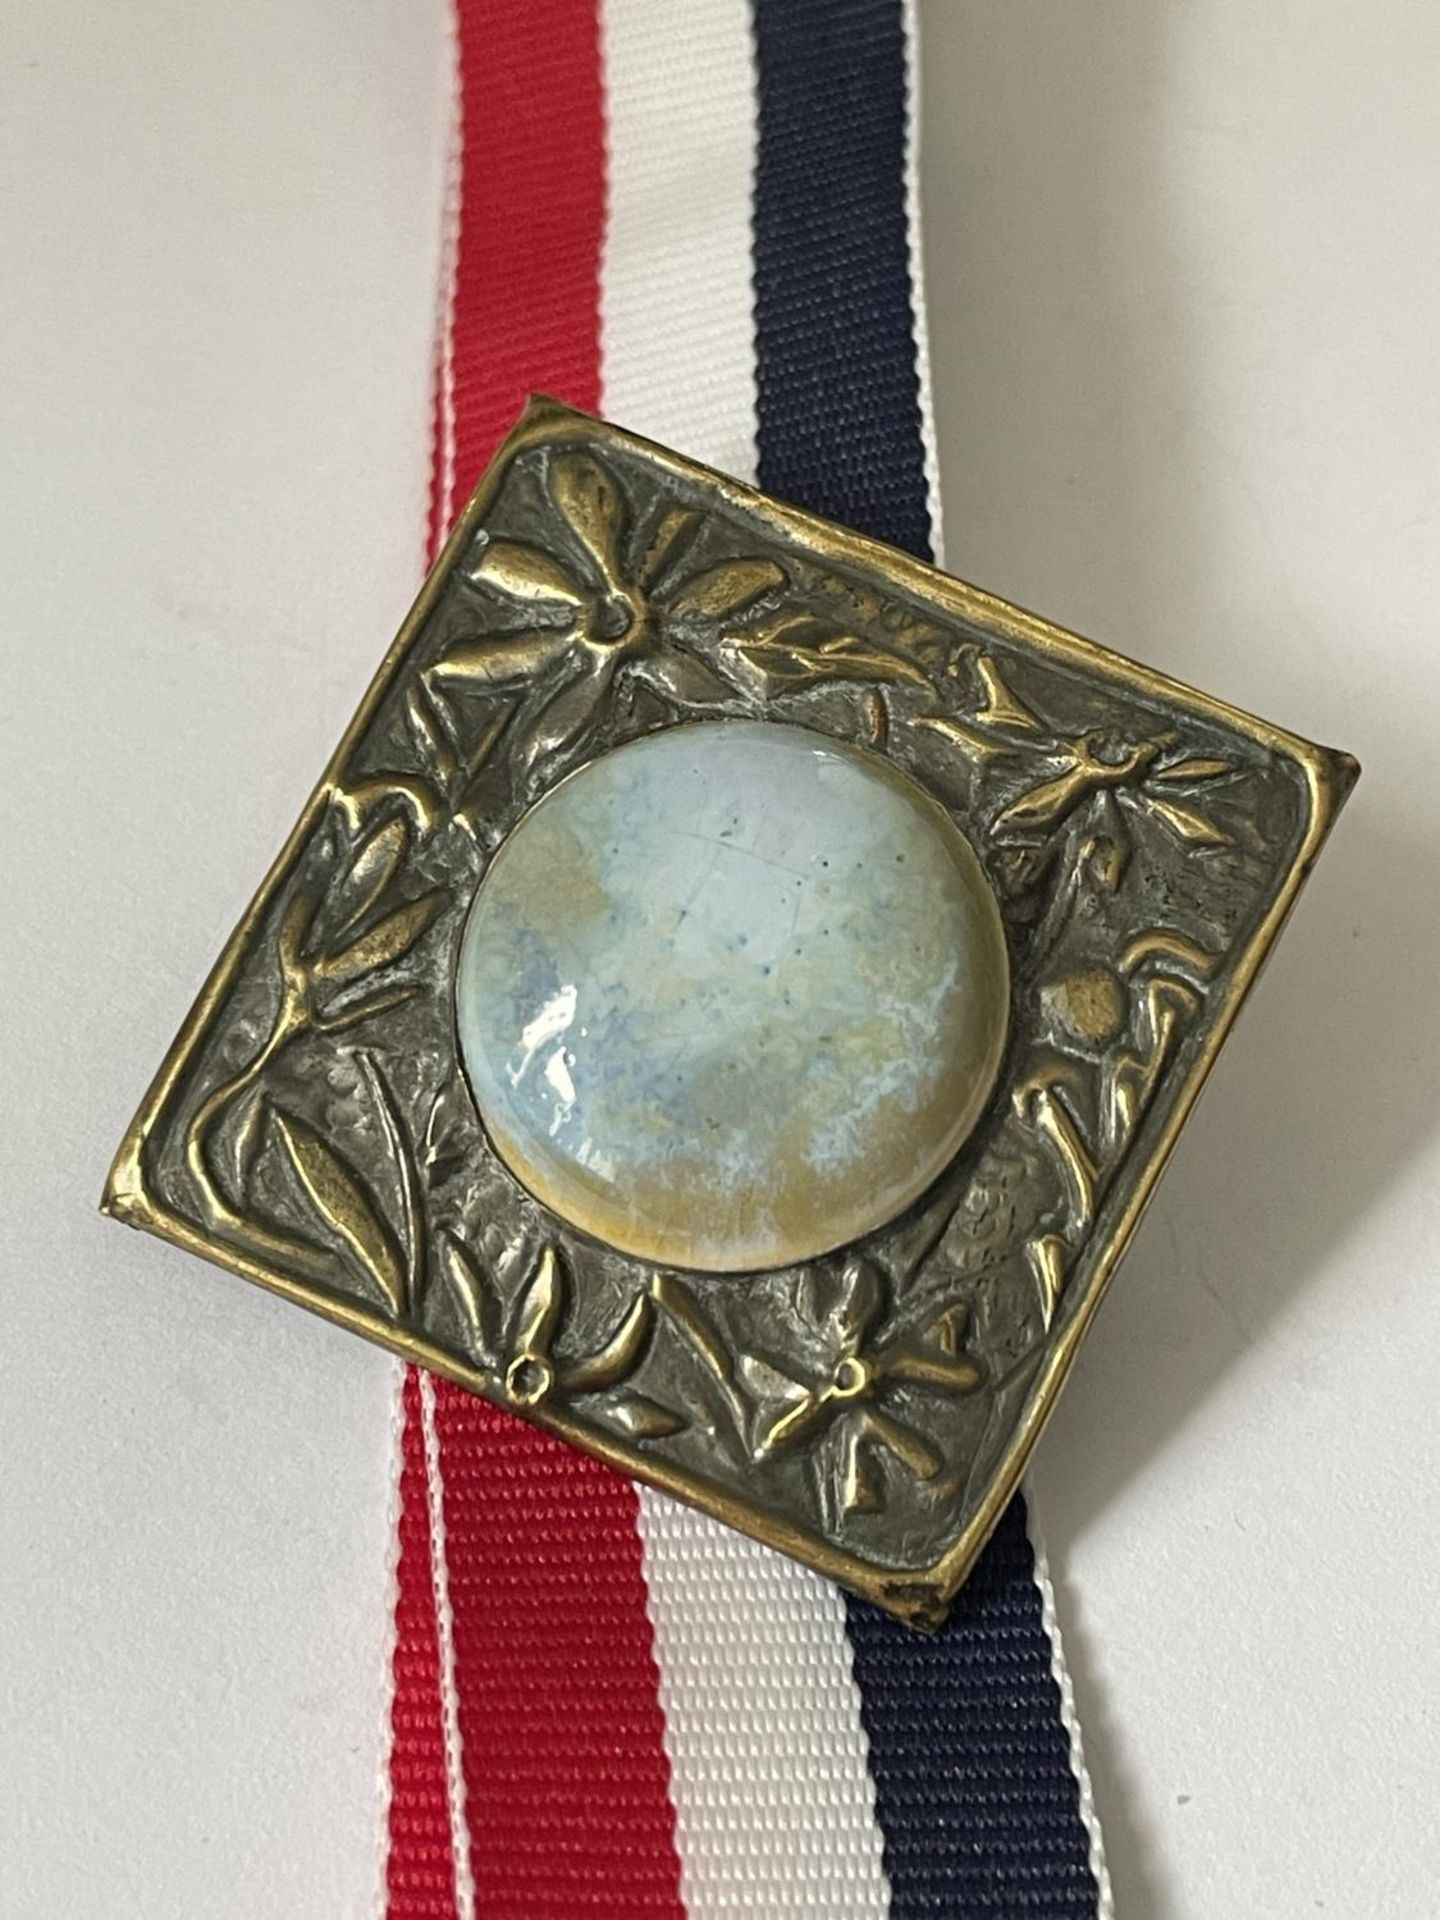 AN ARTS AND CRAFTS RUSKIN MEDALLION - Image 2 of 3